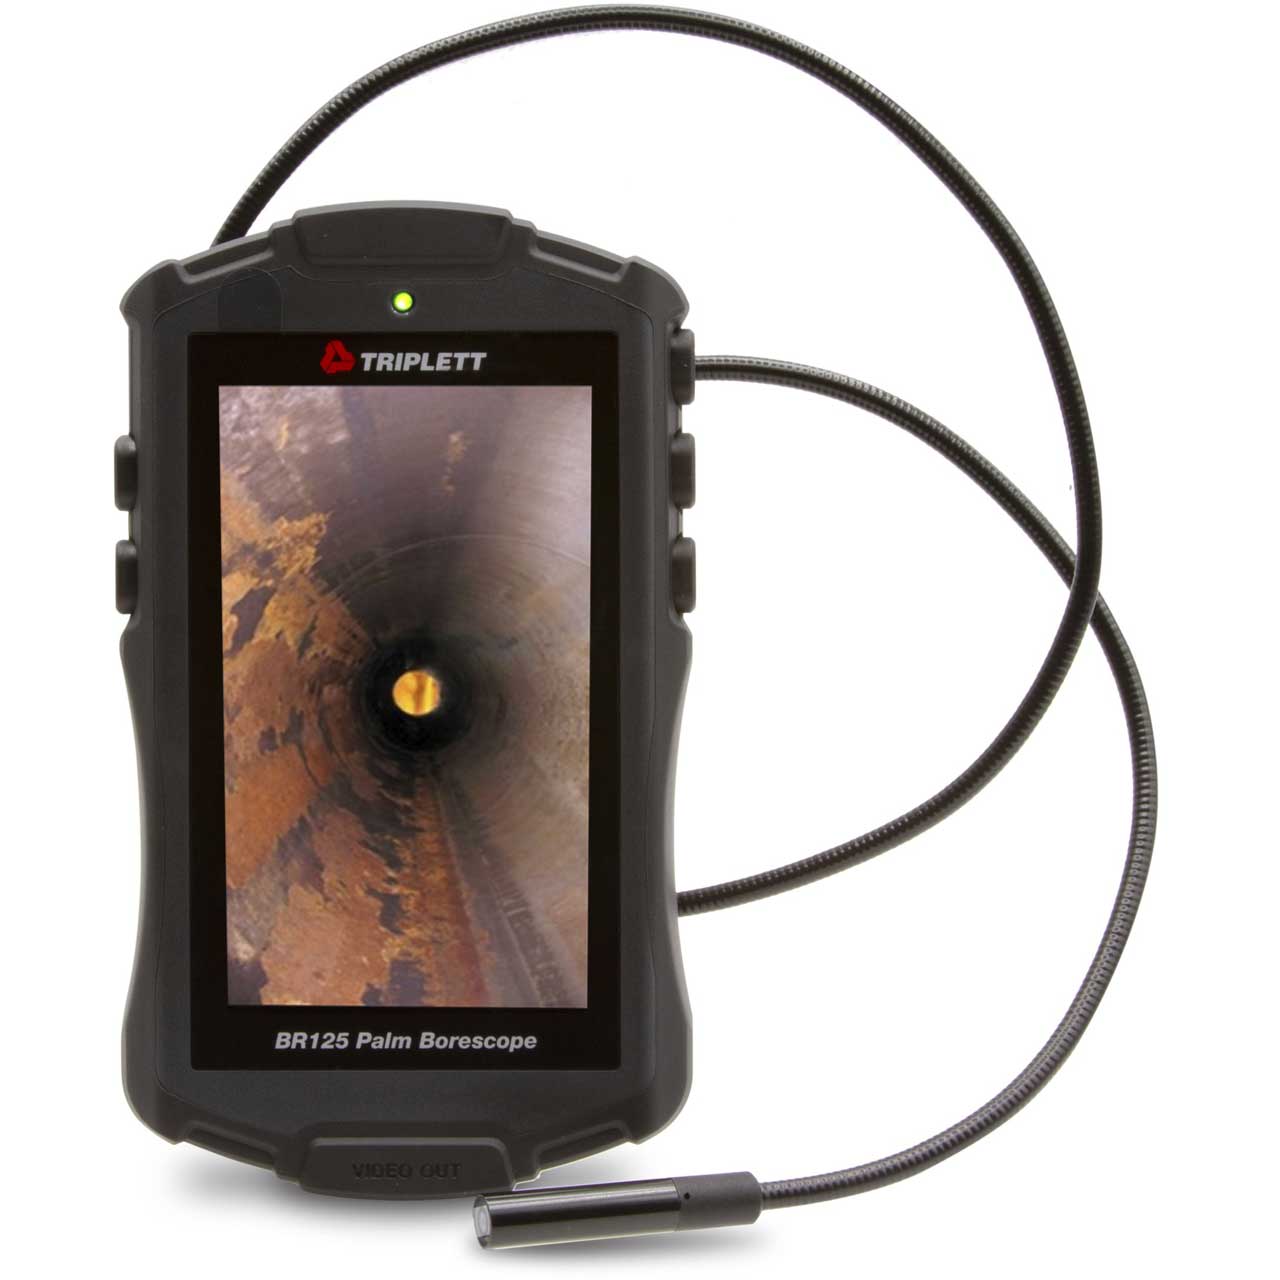 Triplett BR125 Waterproof (IP67) Palm Borescope Inspection Camera with 2x Digital Zoom and 2.5 Foot Cable TRIPL-BR125